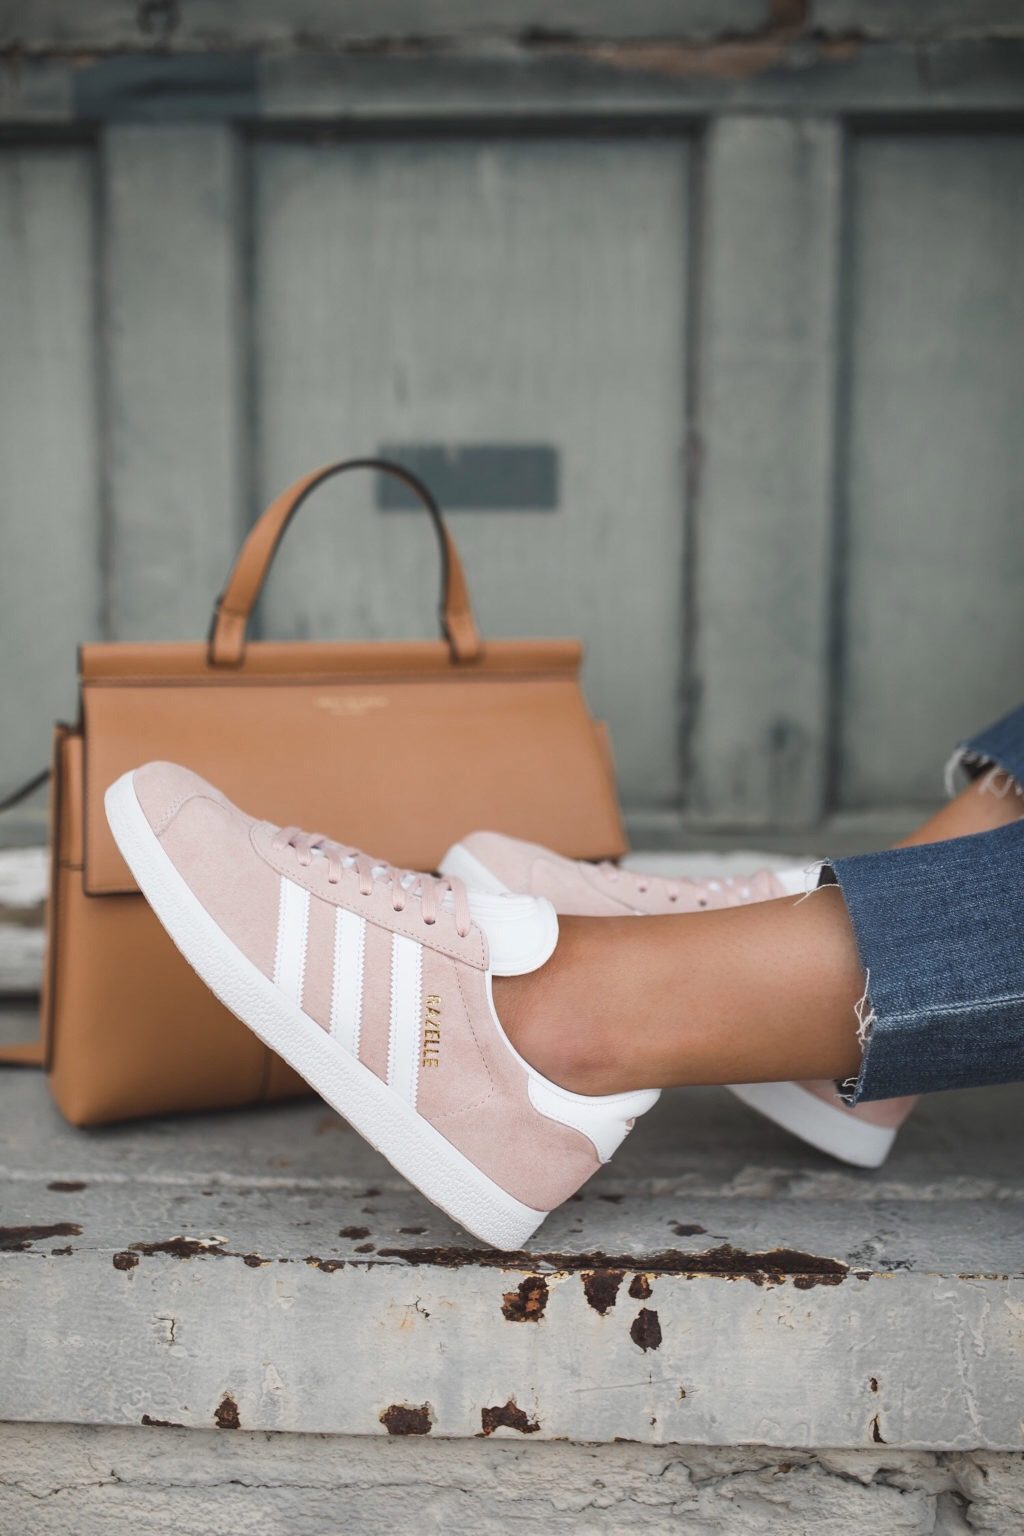 blush colored tennis shoes